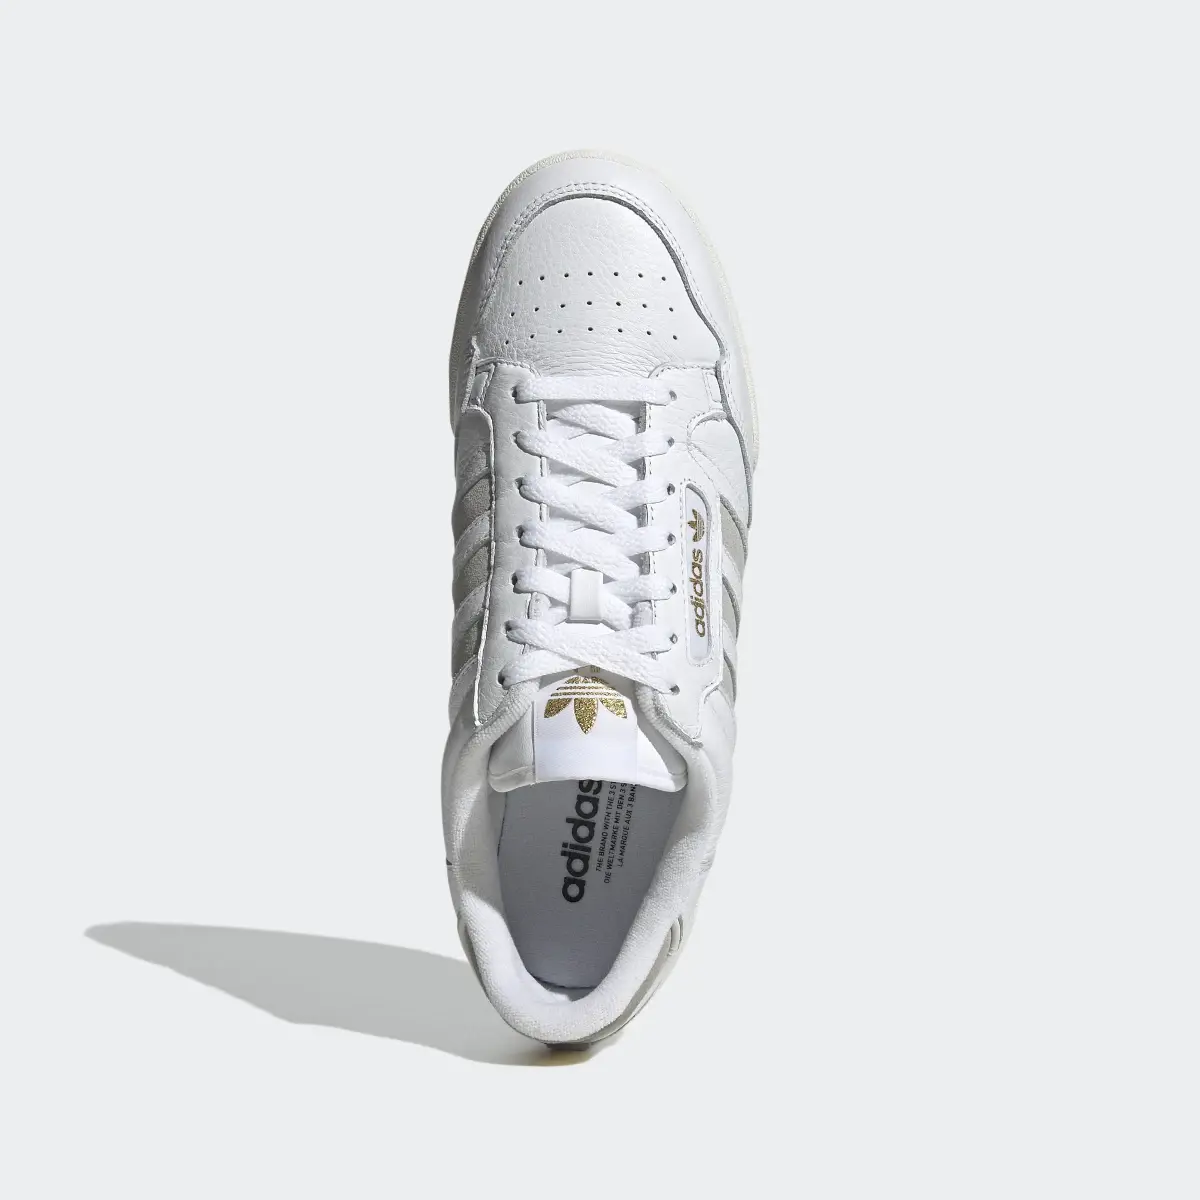 Adidas Continental 80 Stripes Shoes. 3